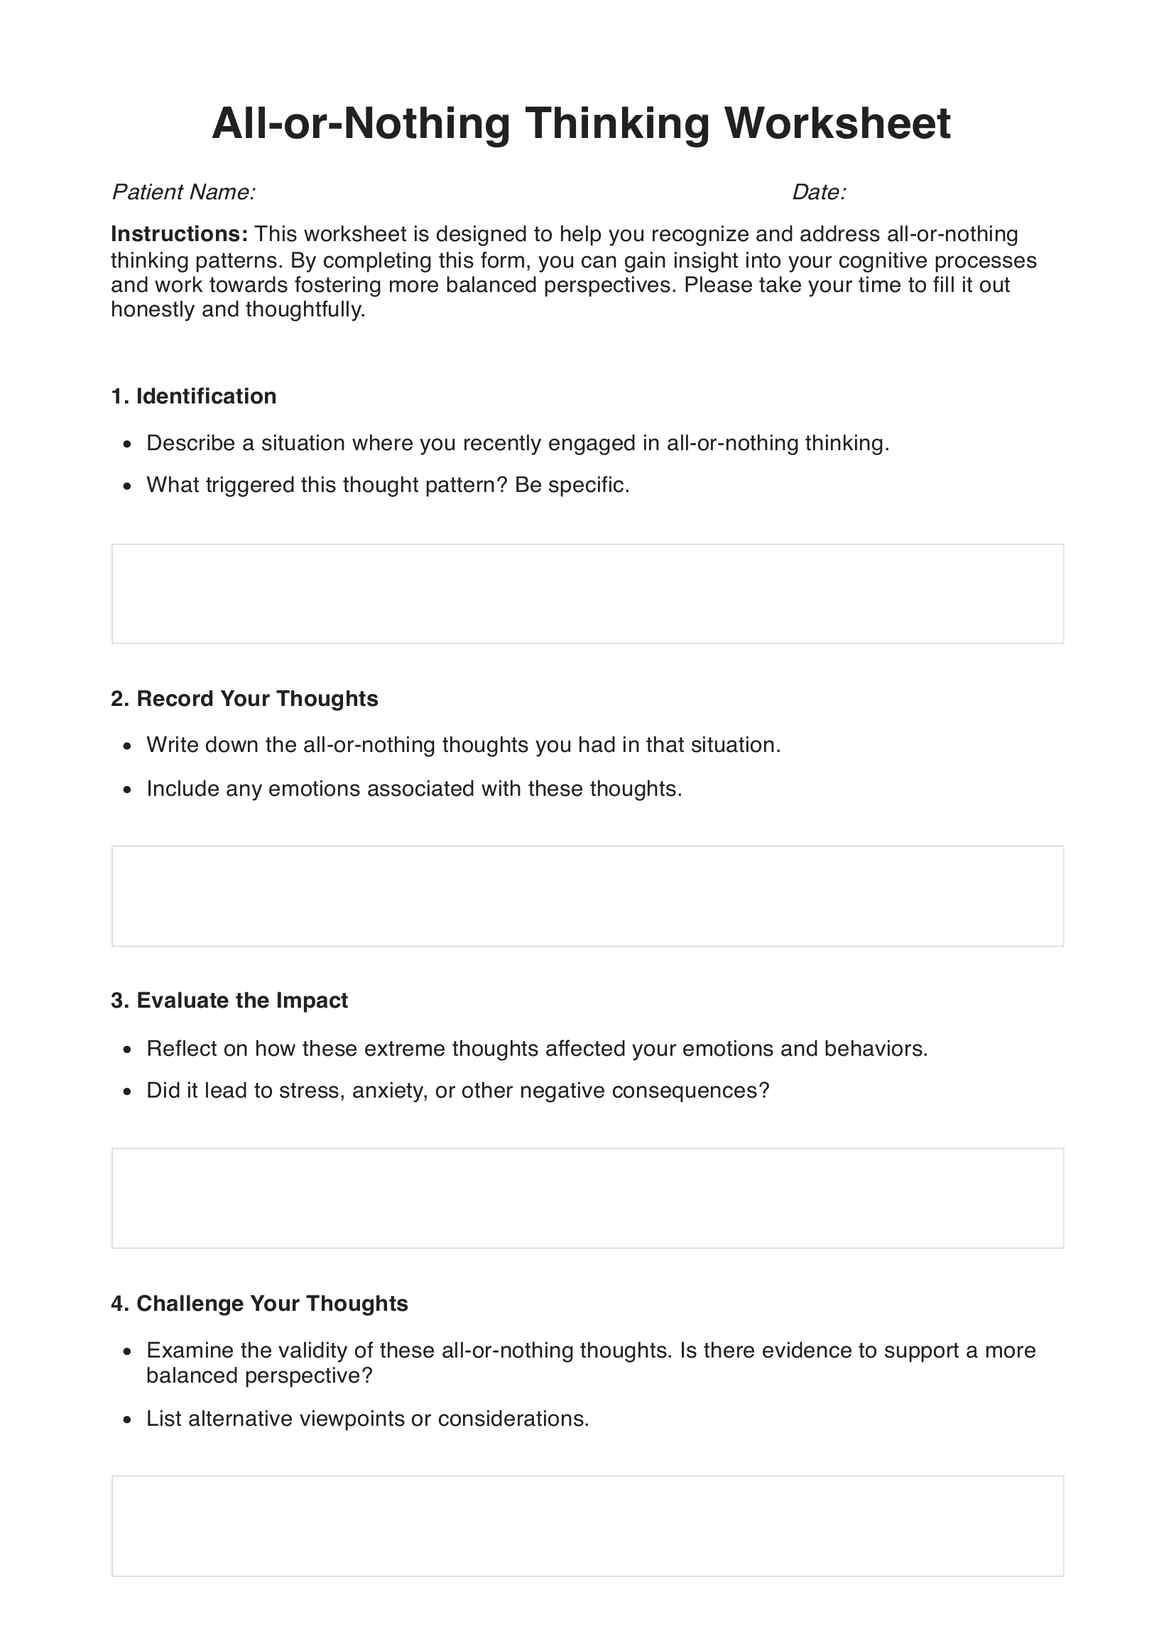 All Or Nothing Thinking Worksheets PDF Example